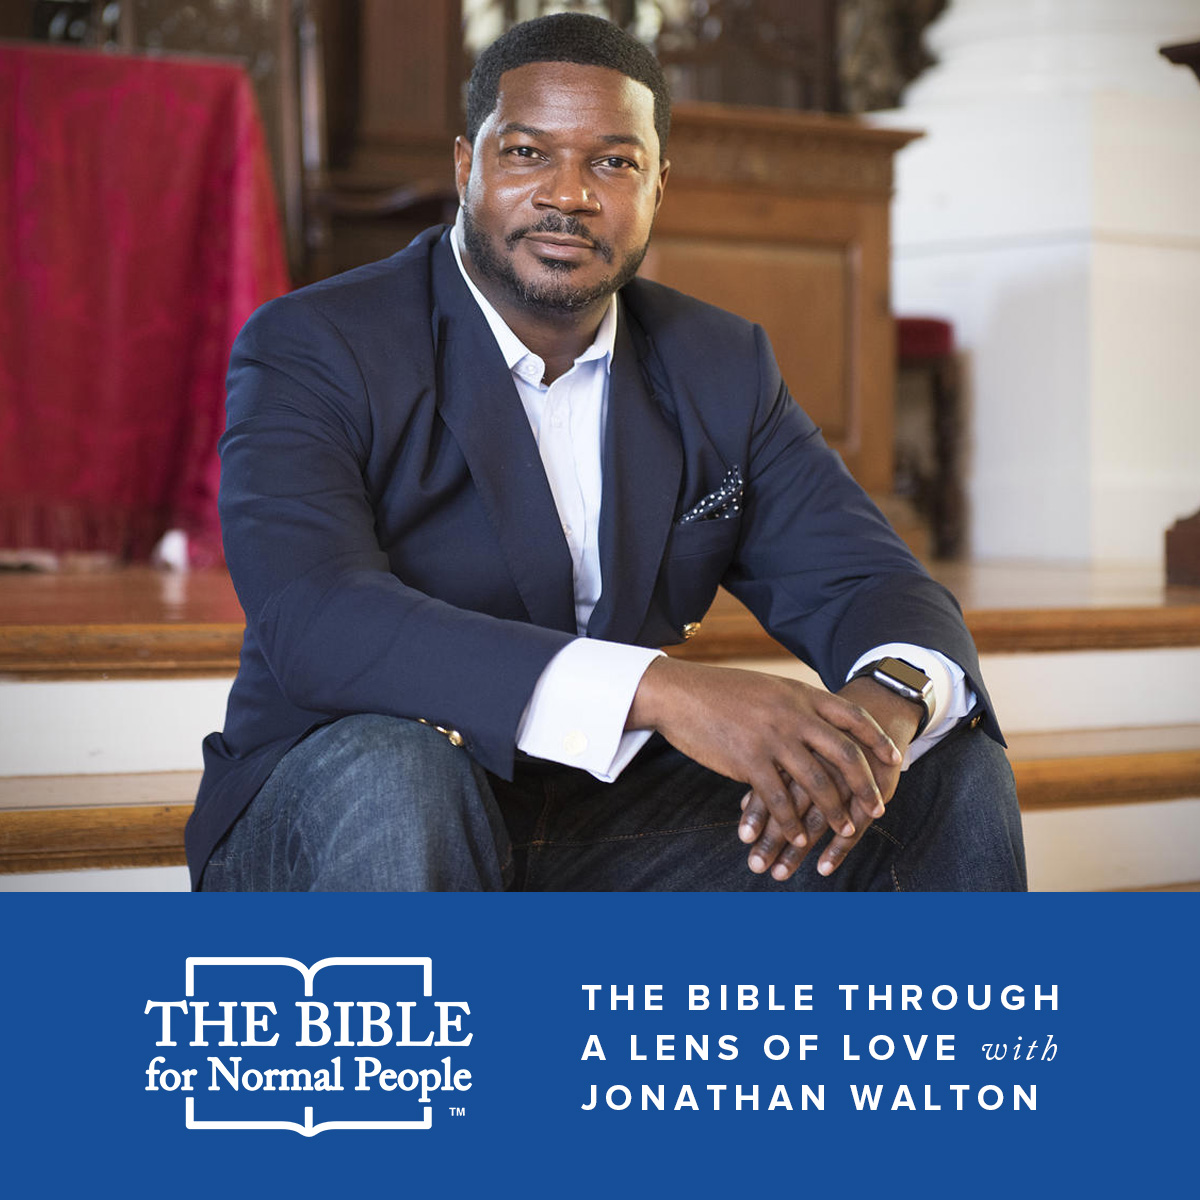 Interview with Jonathan Walton: Reading the Bible Through the Lens of Love